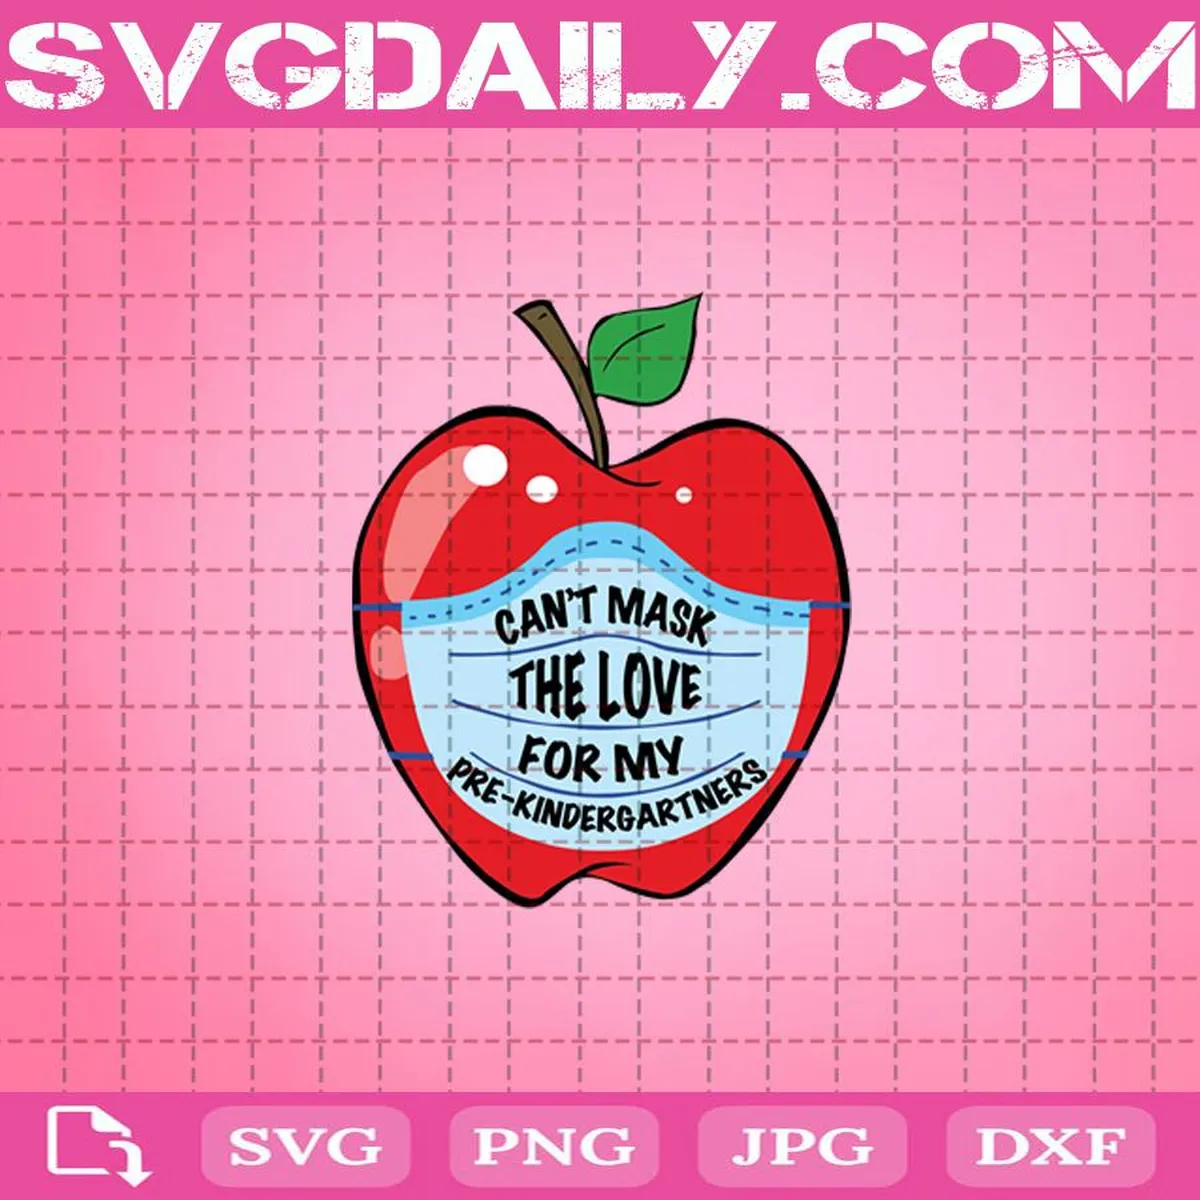 Can't Mask The Love For My Pre Kindergartners Svg, Pre Kindergartners Svg, Apple Svg, Quarantine Svg, Face Mask Svg